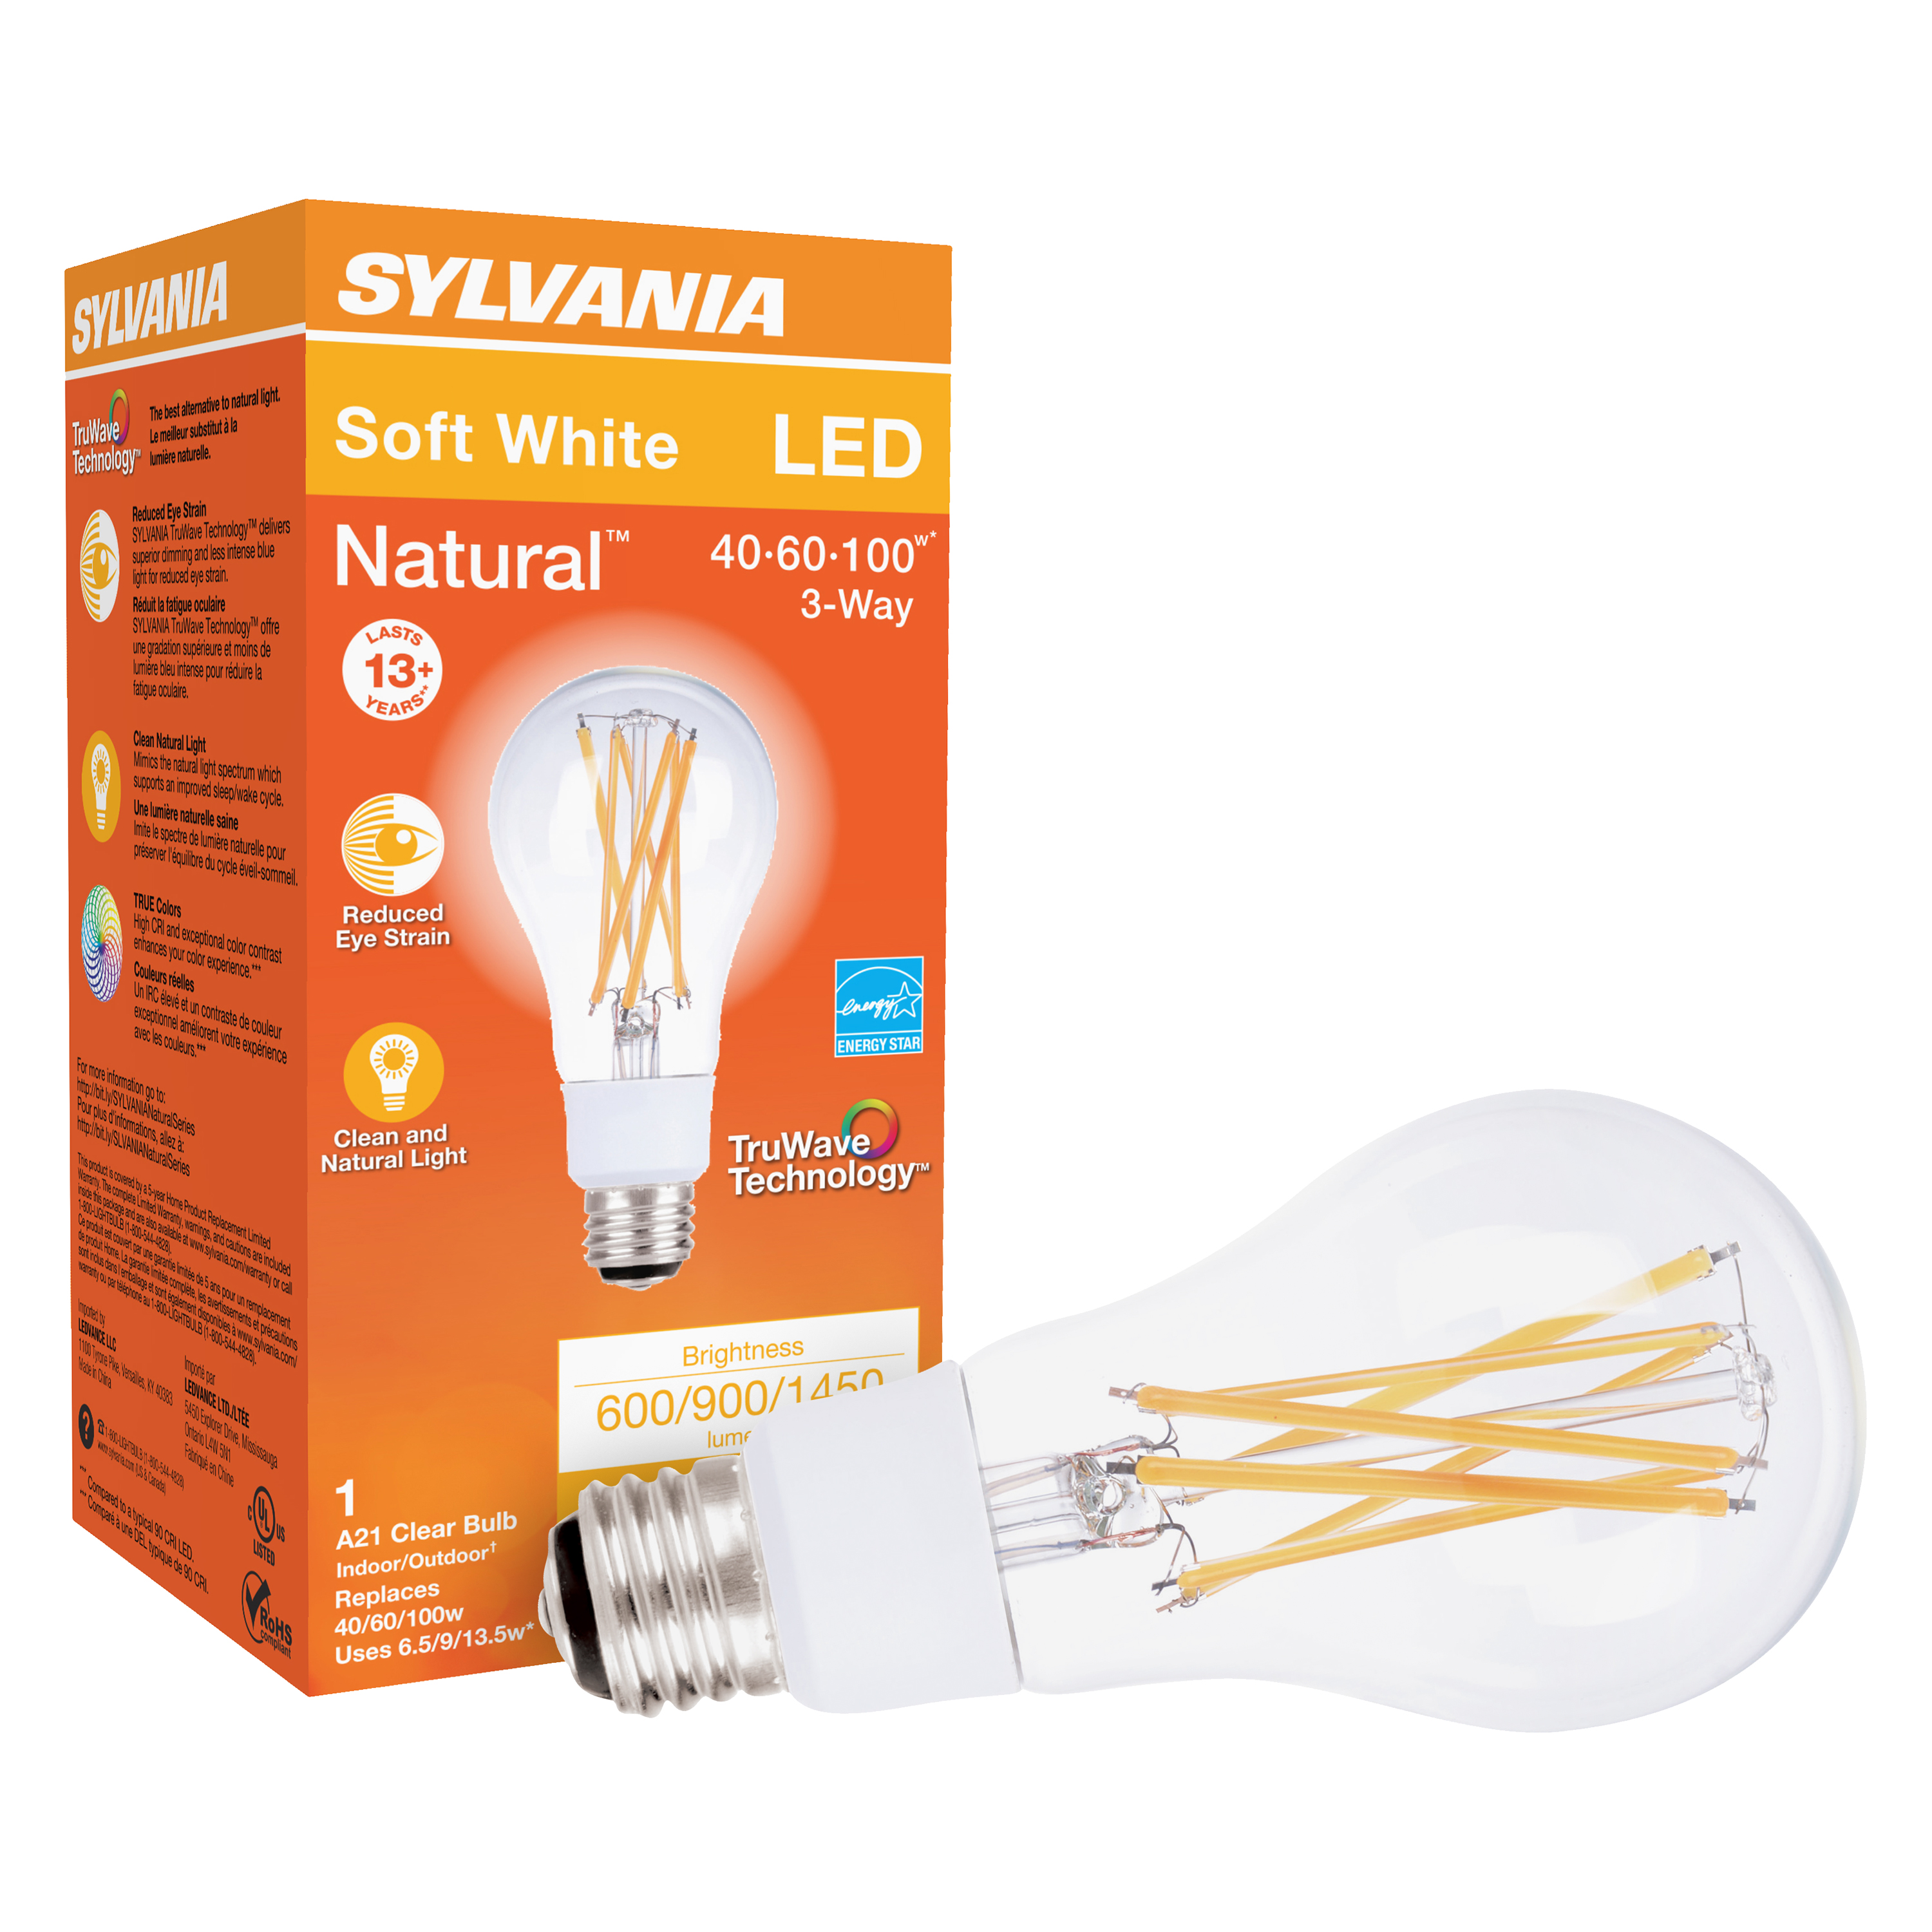 Sylvania 40769 Natural LED Bulb, 3-Way, A21 Lamp, 100 W Equivalent, E26 Lamp Base, Dimmable, Clear, Soft White Light